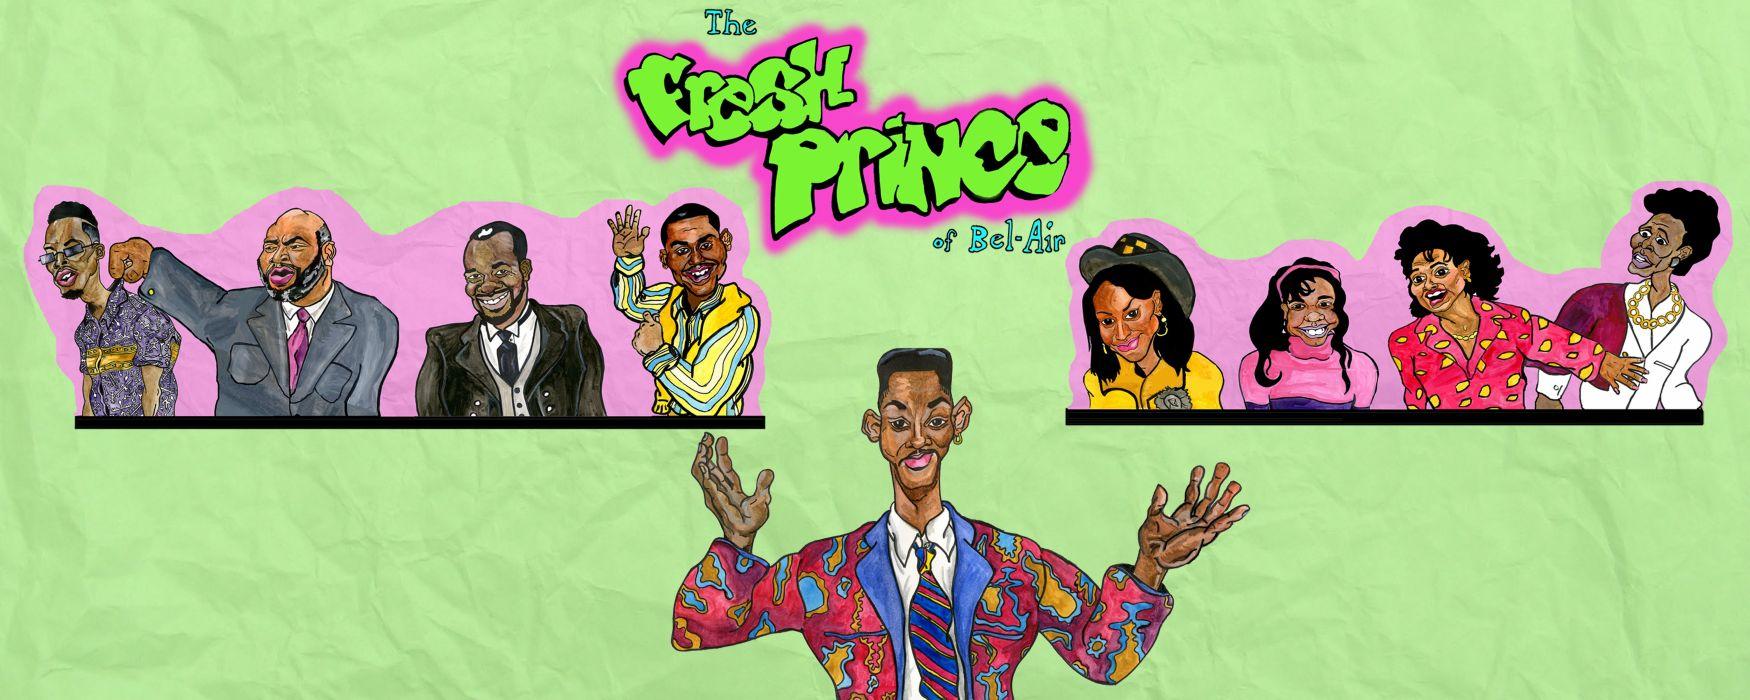 Fresh Prince Of Bel Air Comedy Sitcom Series Television Will Smith